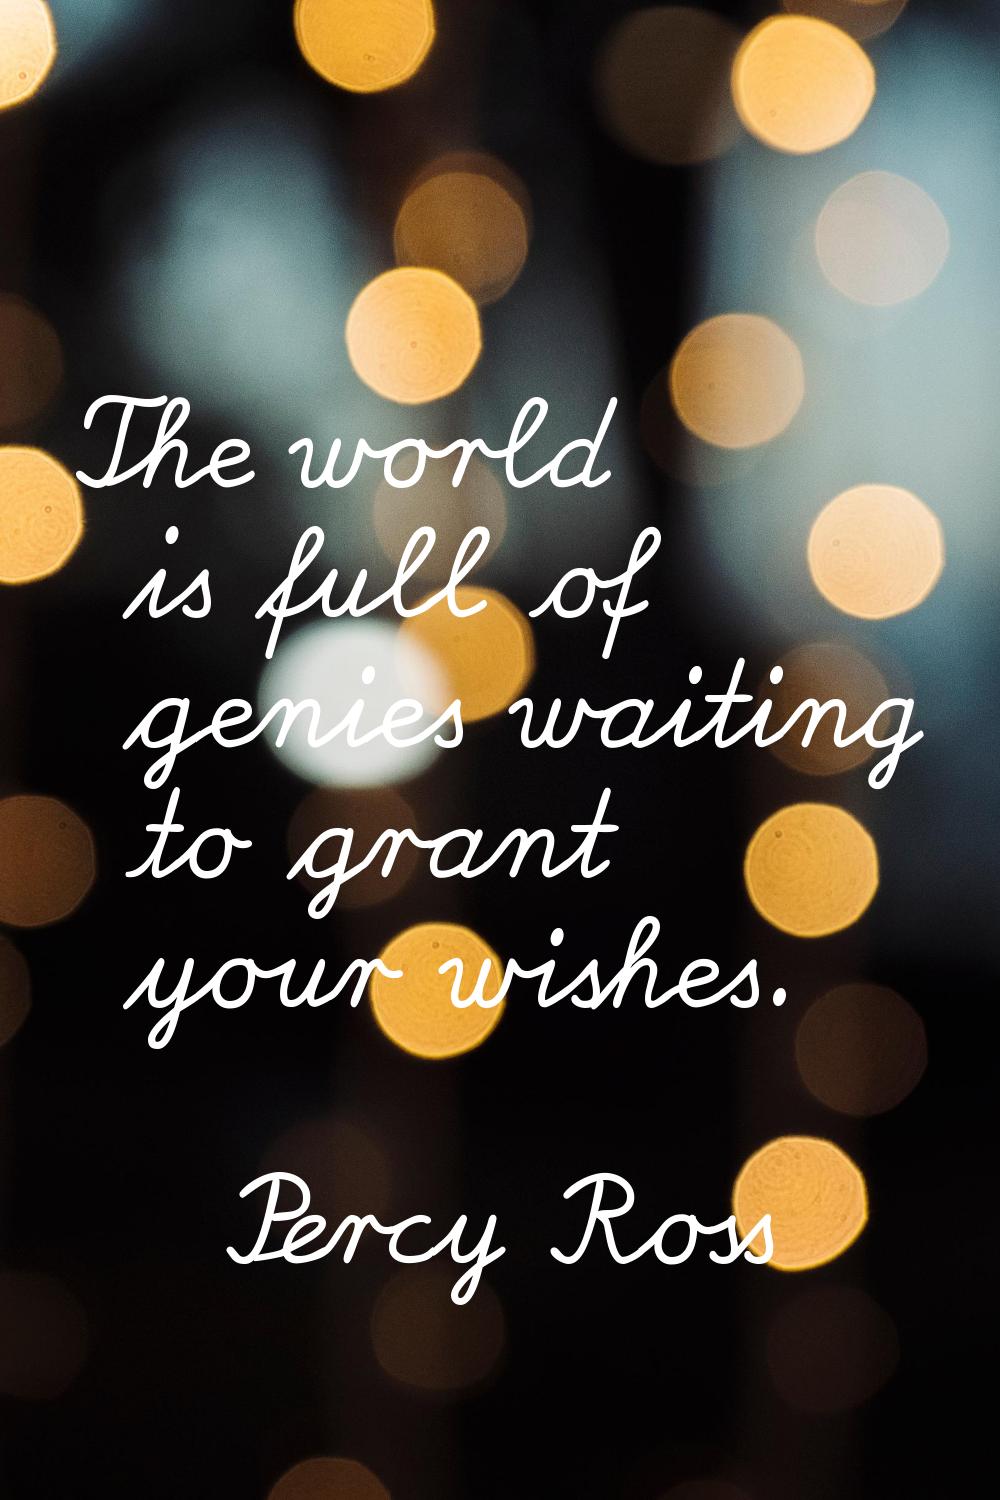 The world is full of genies waiting to grant your wishes.